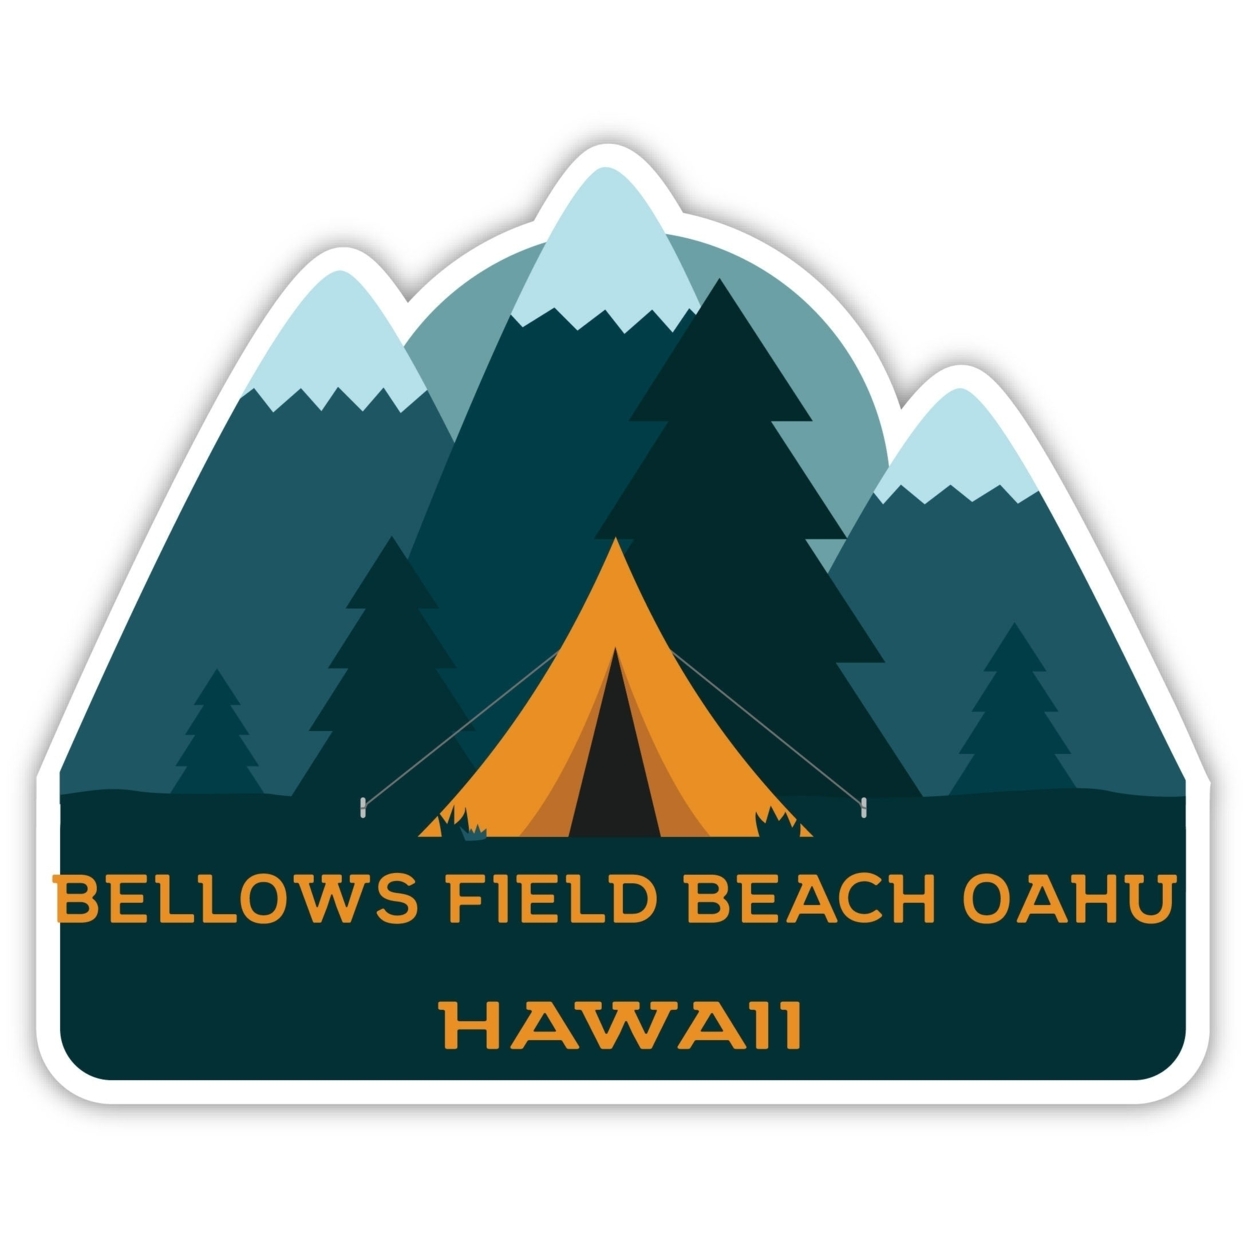 Bellows Field Beach Oahu Hawaii Souvenir Decorative Stickers (Choose Theme And Size) - 4-Pack, 12-Inch, Tent